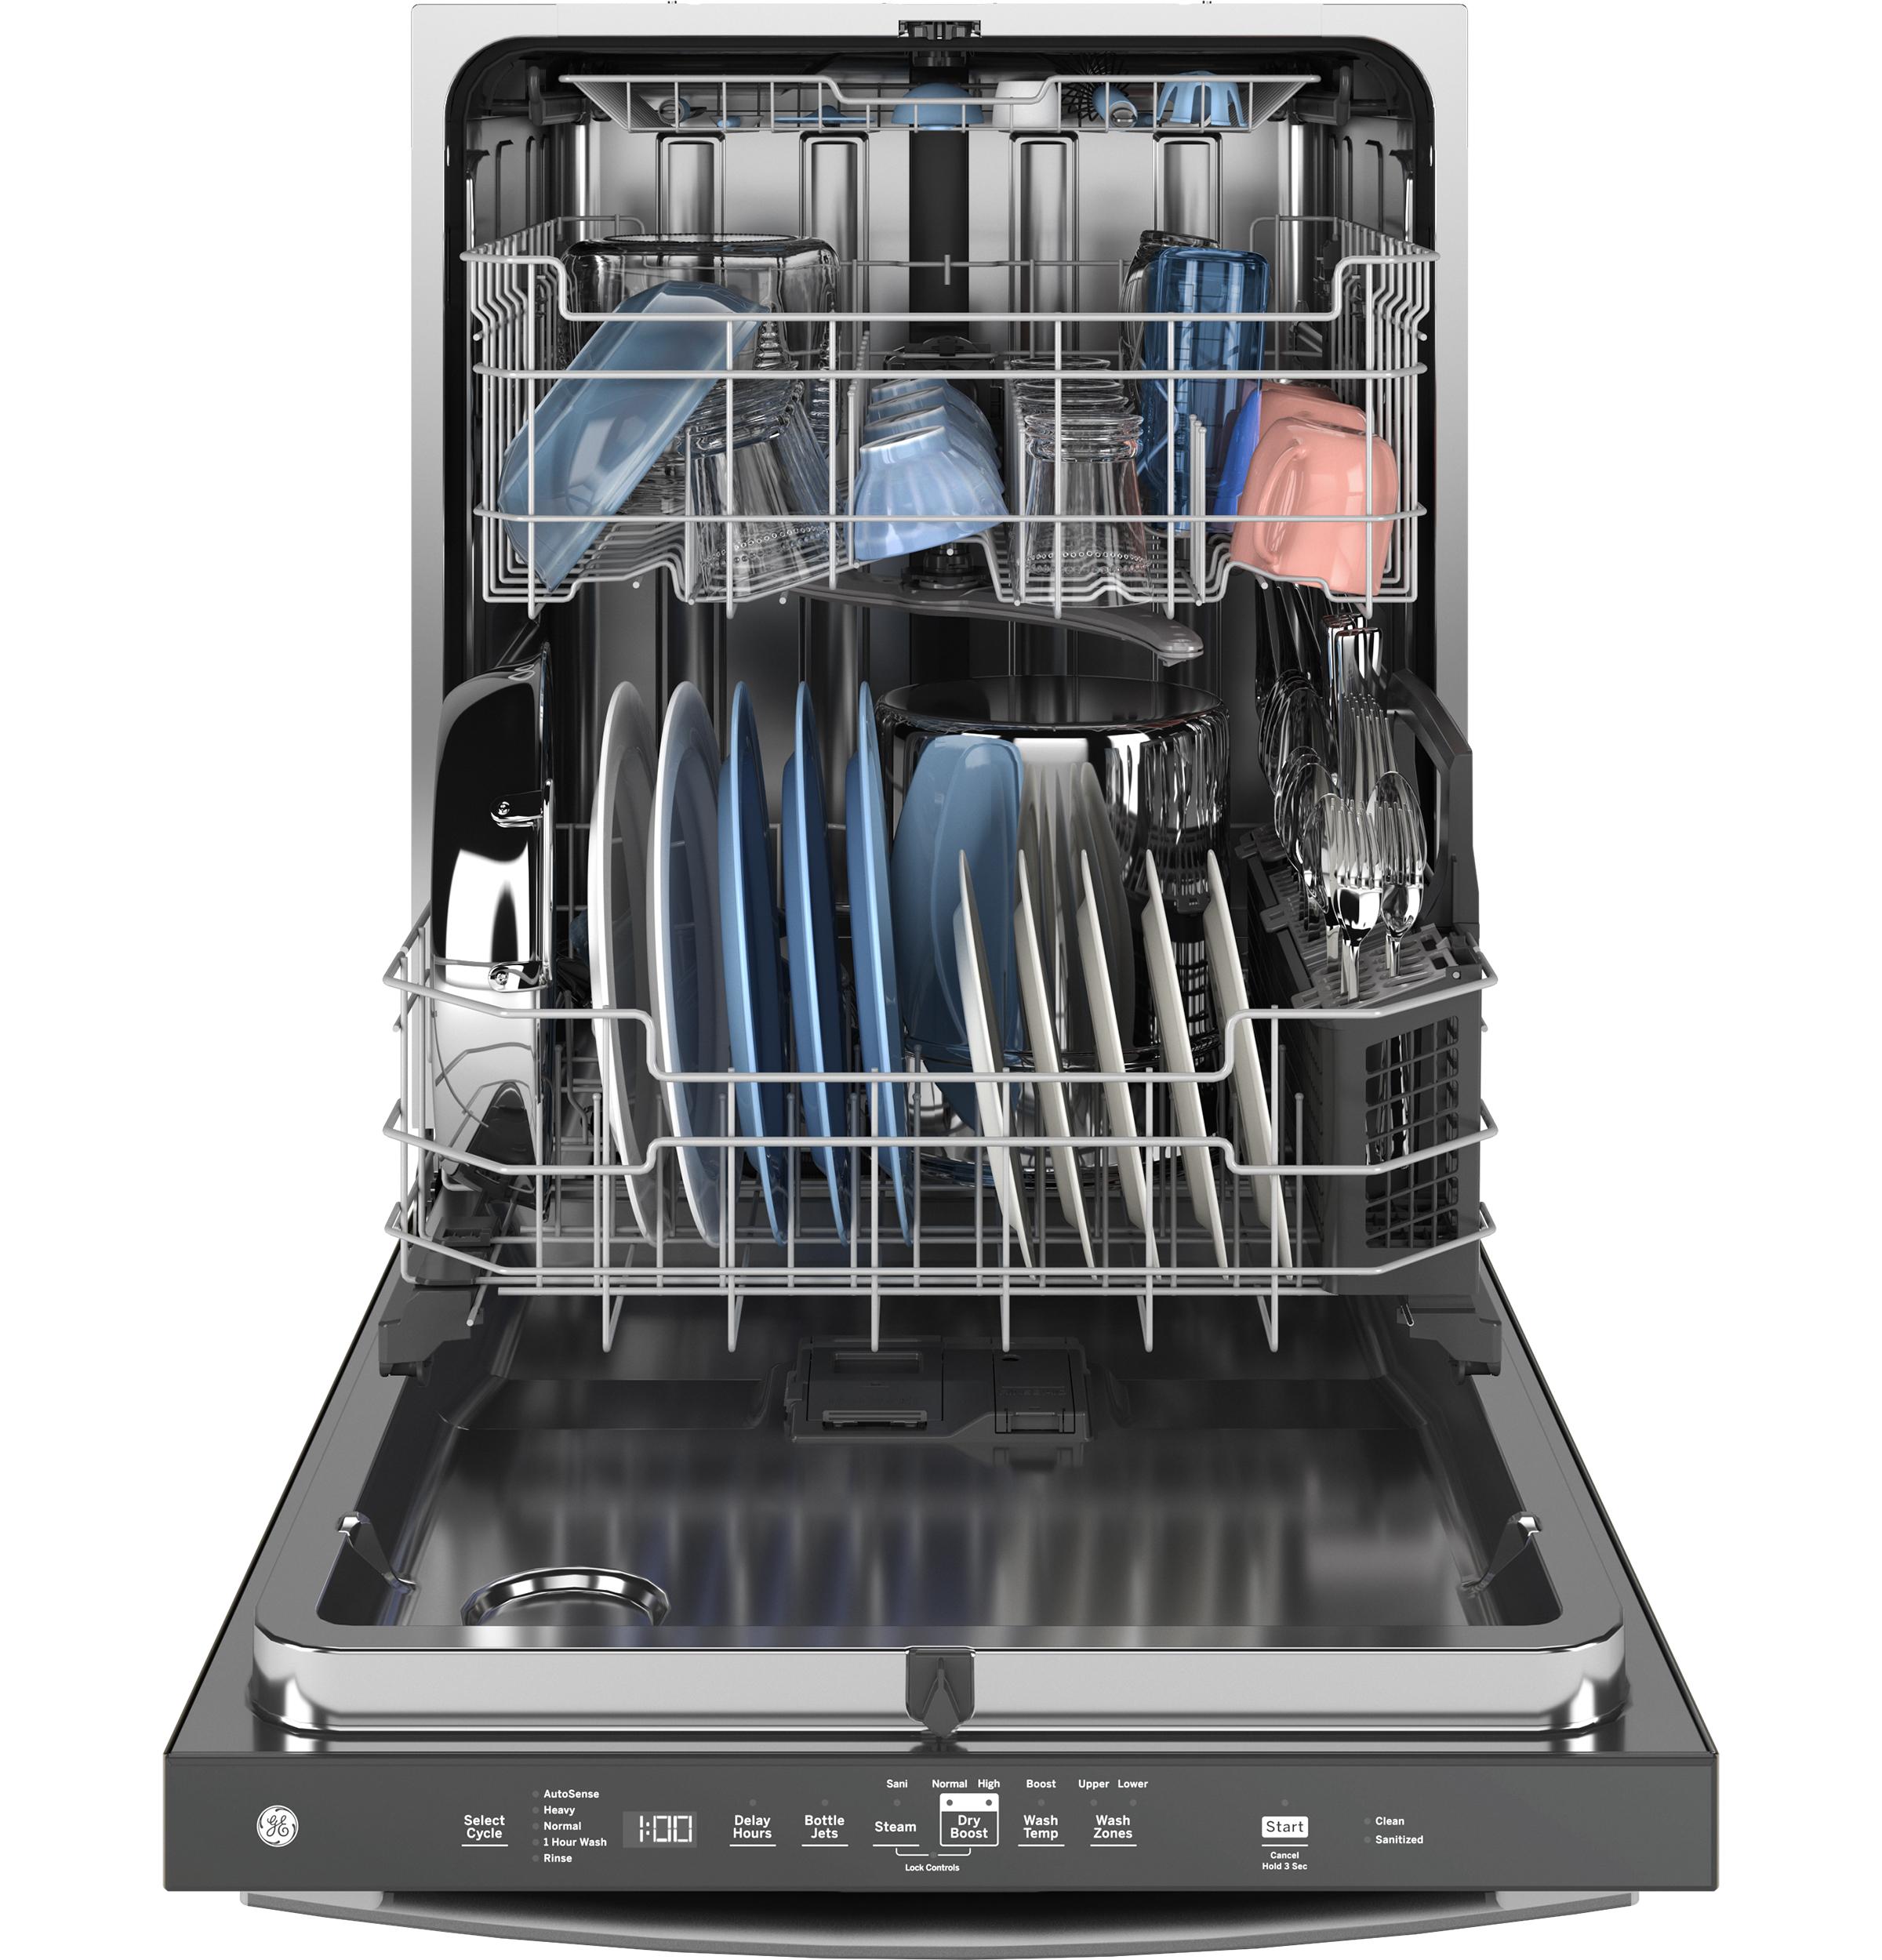 Ge Appliances GDT650SYVFS Ge® Fingerprint Resistant Top Control With Stainless Steel Interior Dishwasher With Sanitize Cycle